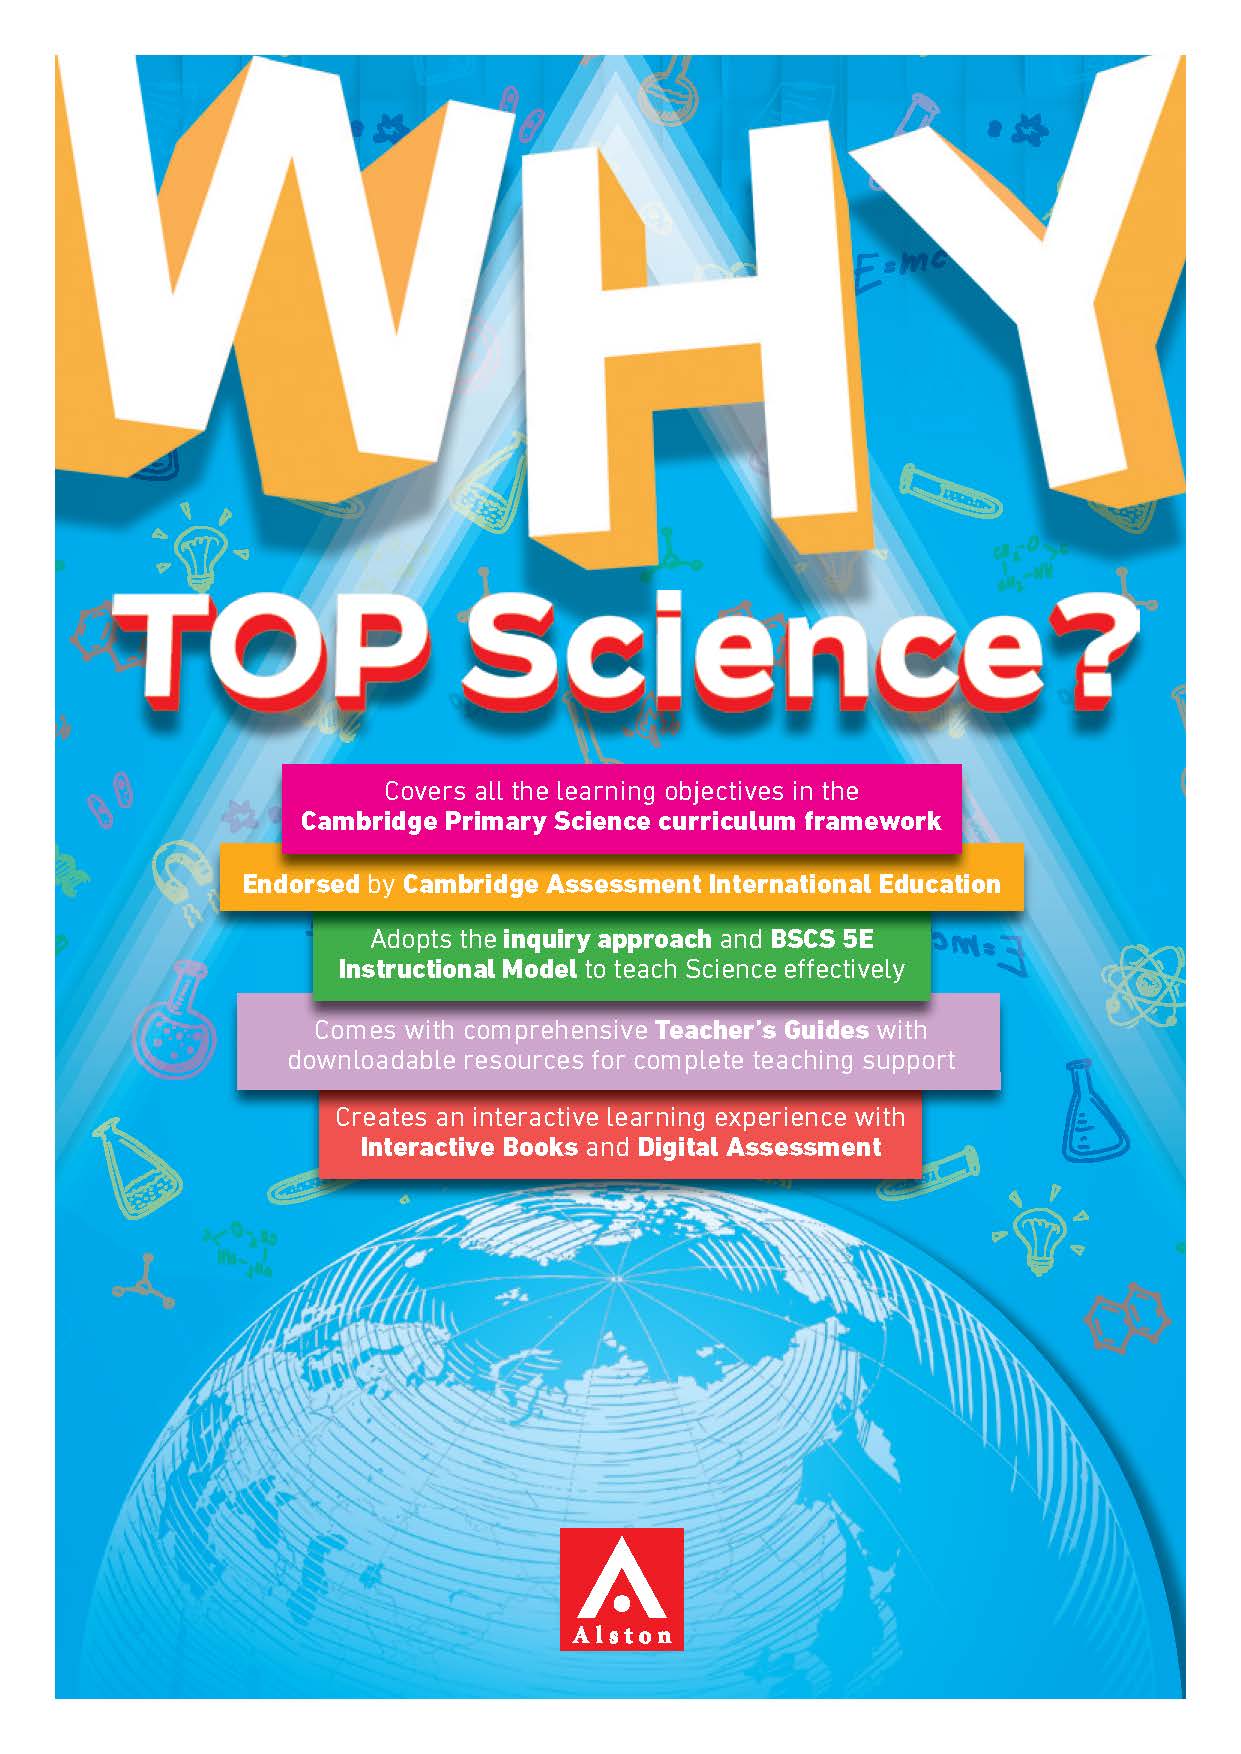 Alston 2019 TOP Science Flyer Cover